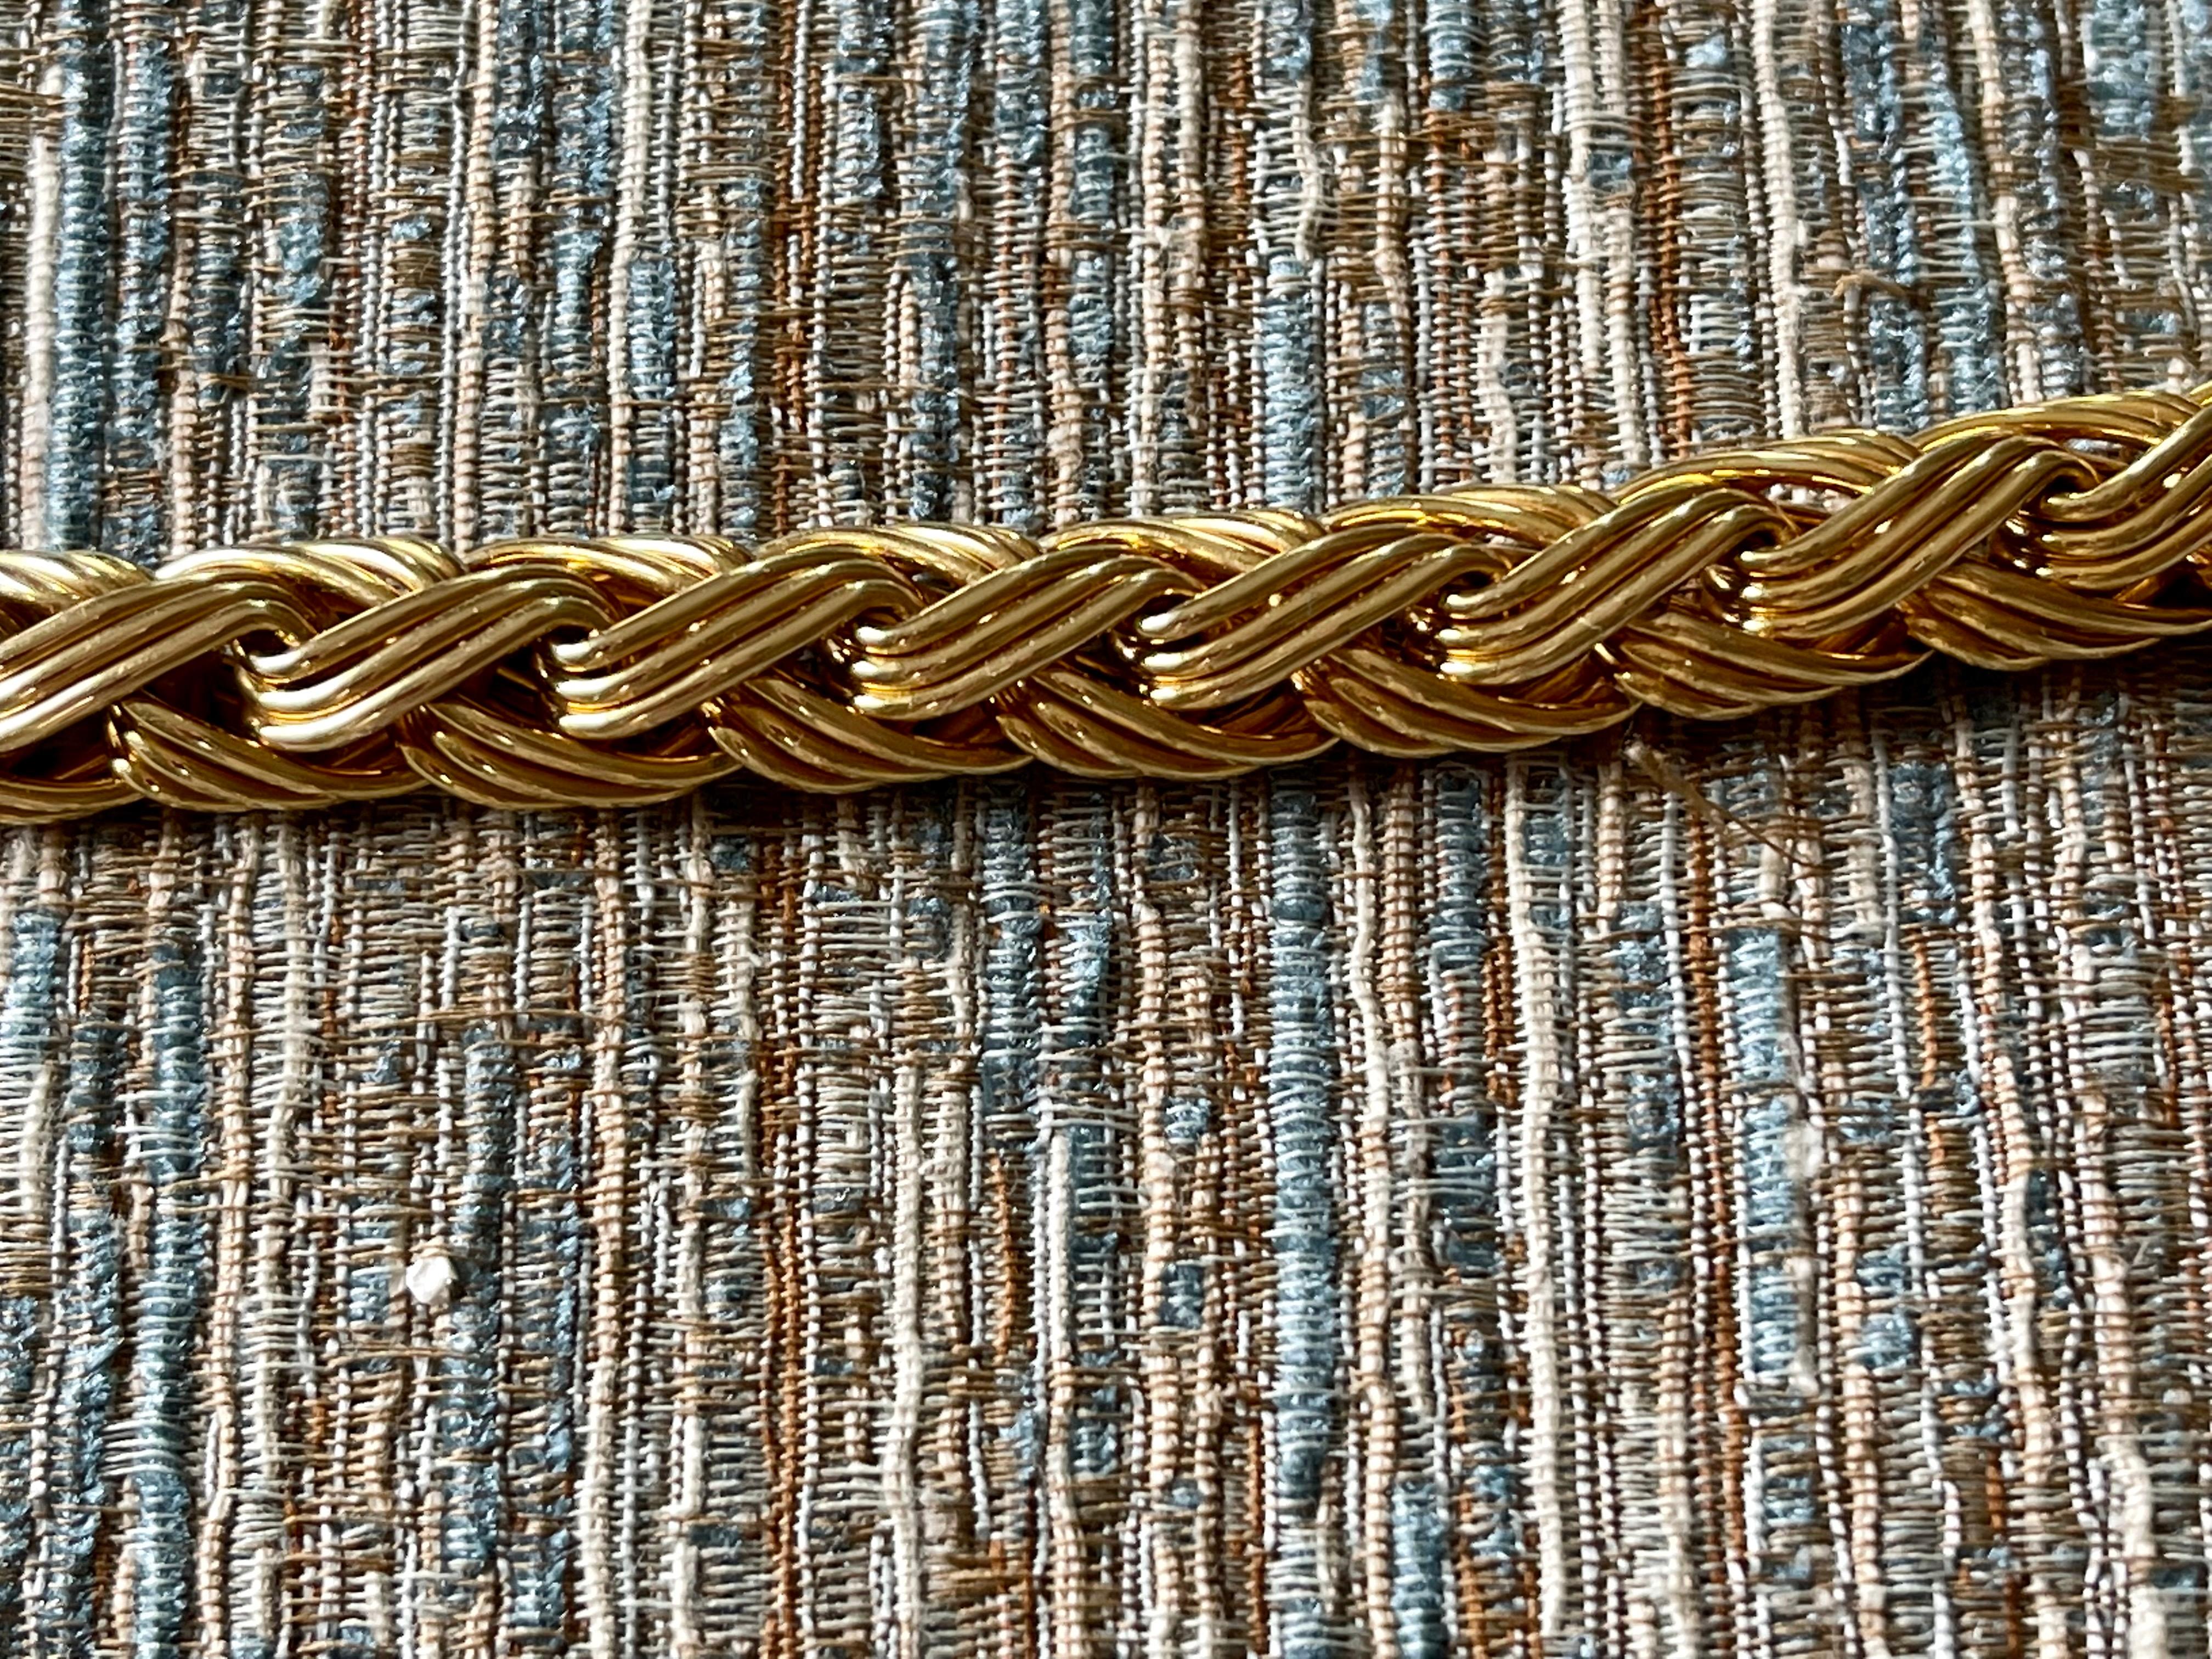 Vintage 18 K Yellow Gold Cable Knit Neckalce and Bracelet Signed Meister Zurich For Sale 4